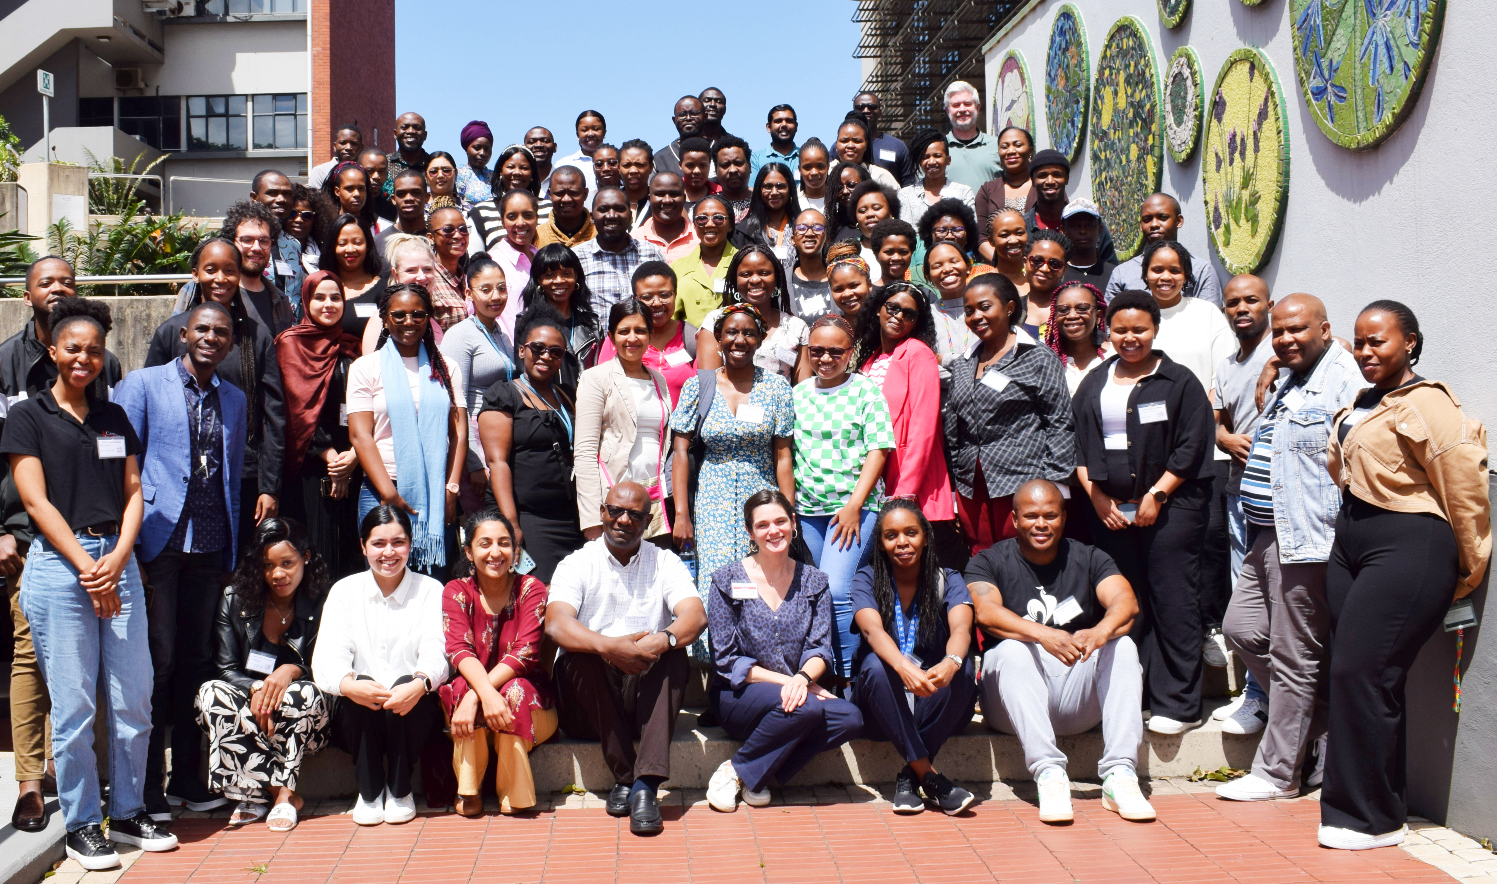 Group photo with the Durban Data Science workshop participants